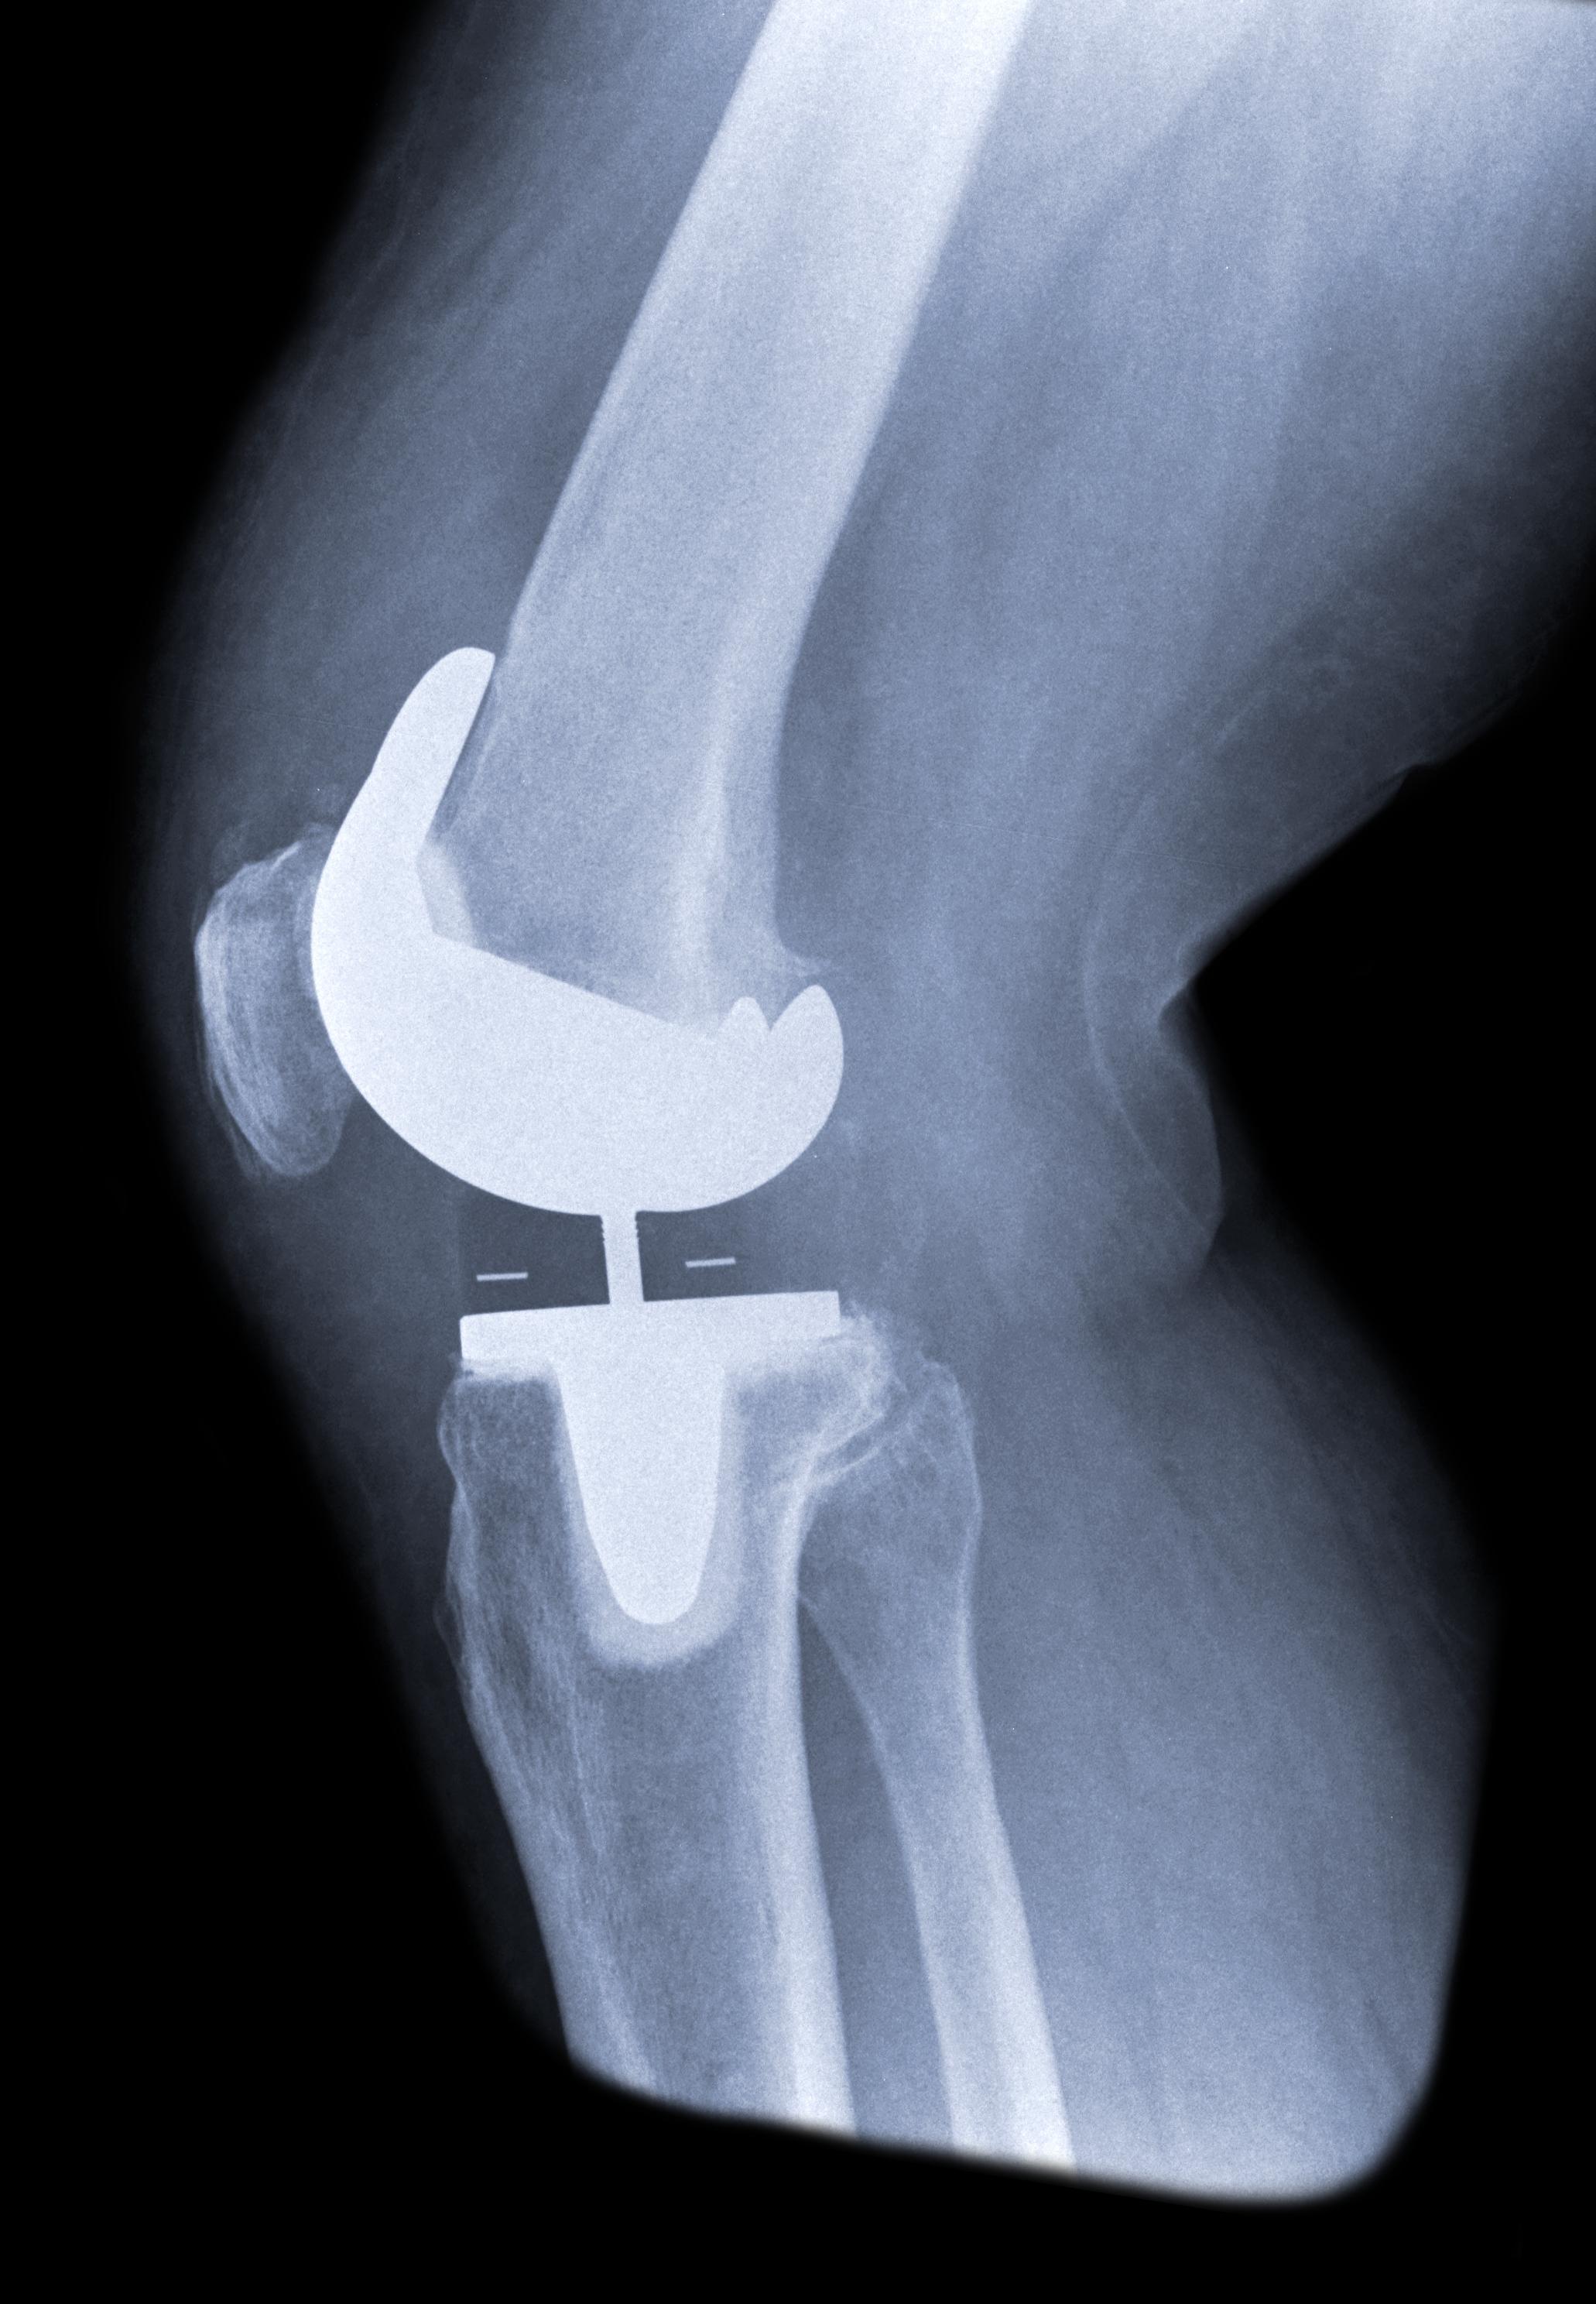 Time for a total knee replacement? - Mayo Clinic Health System